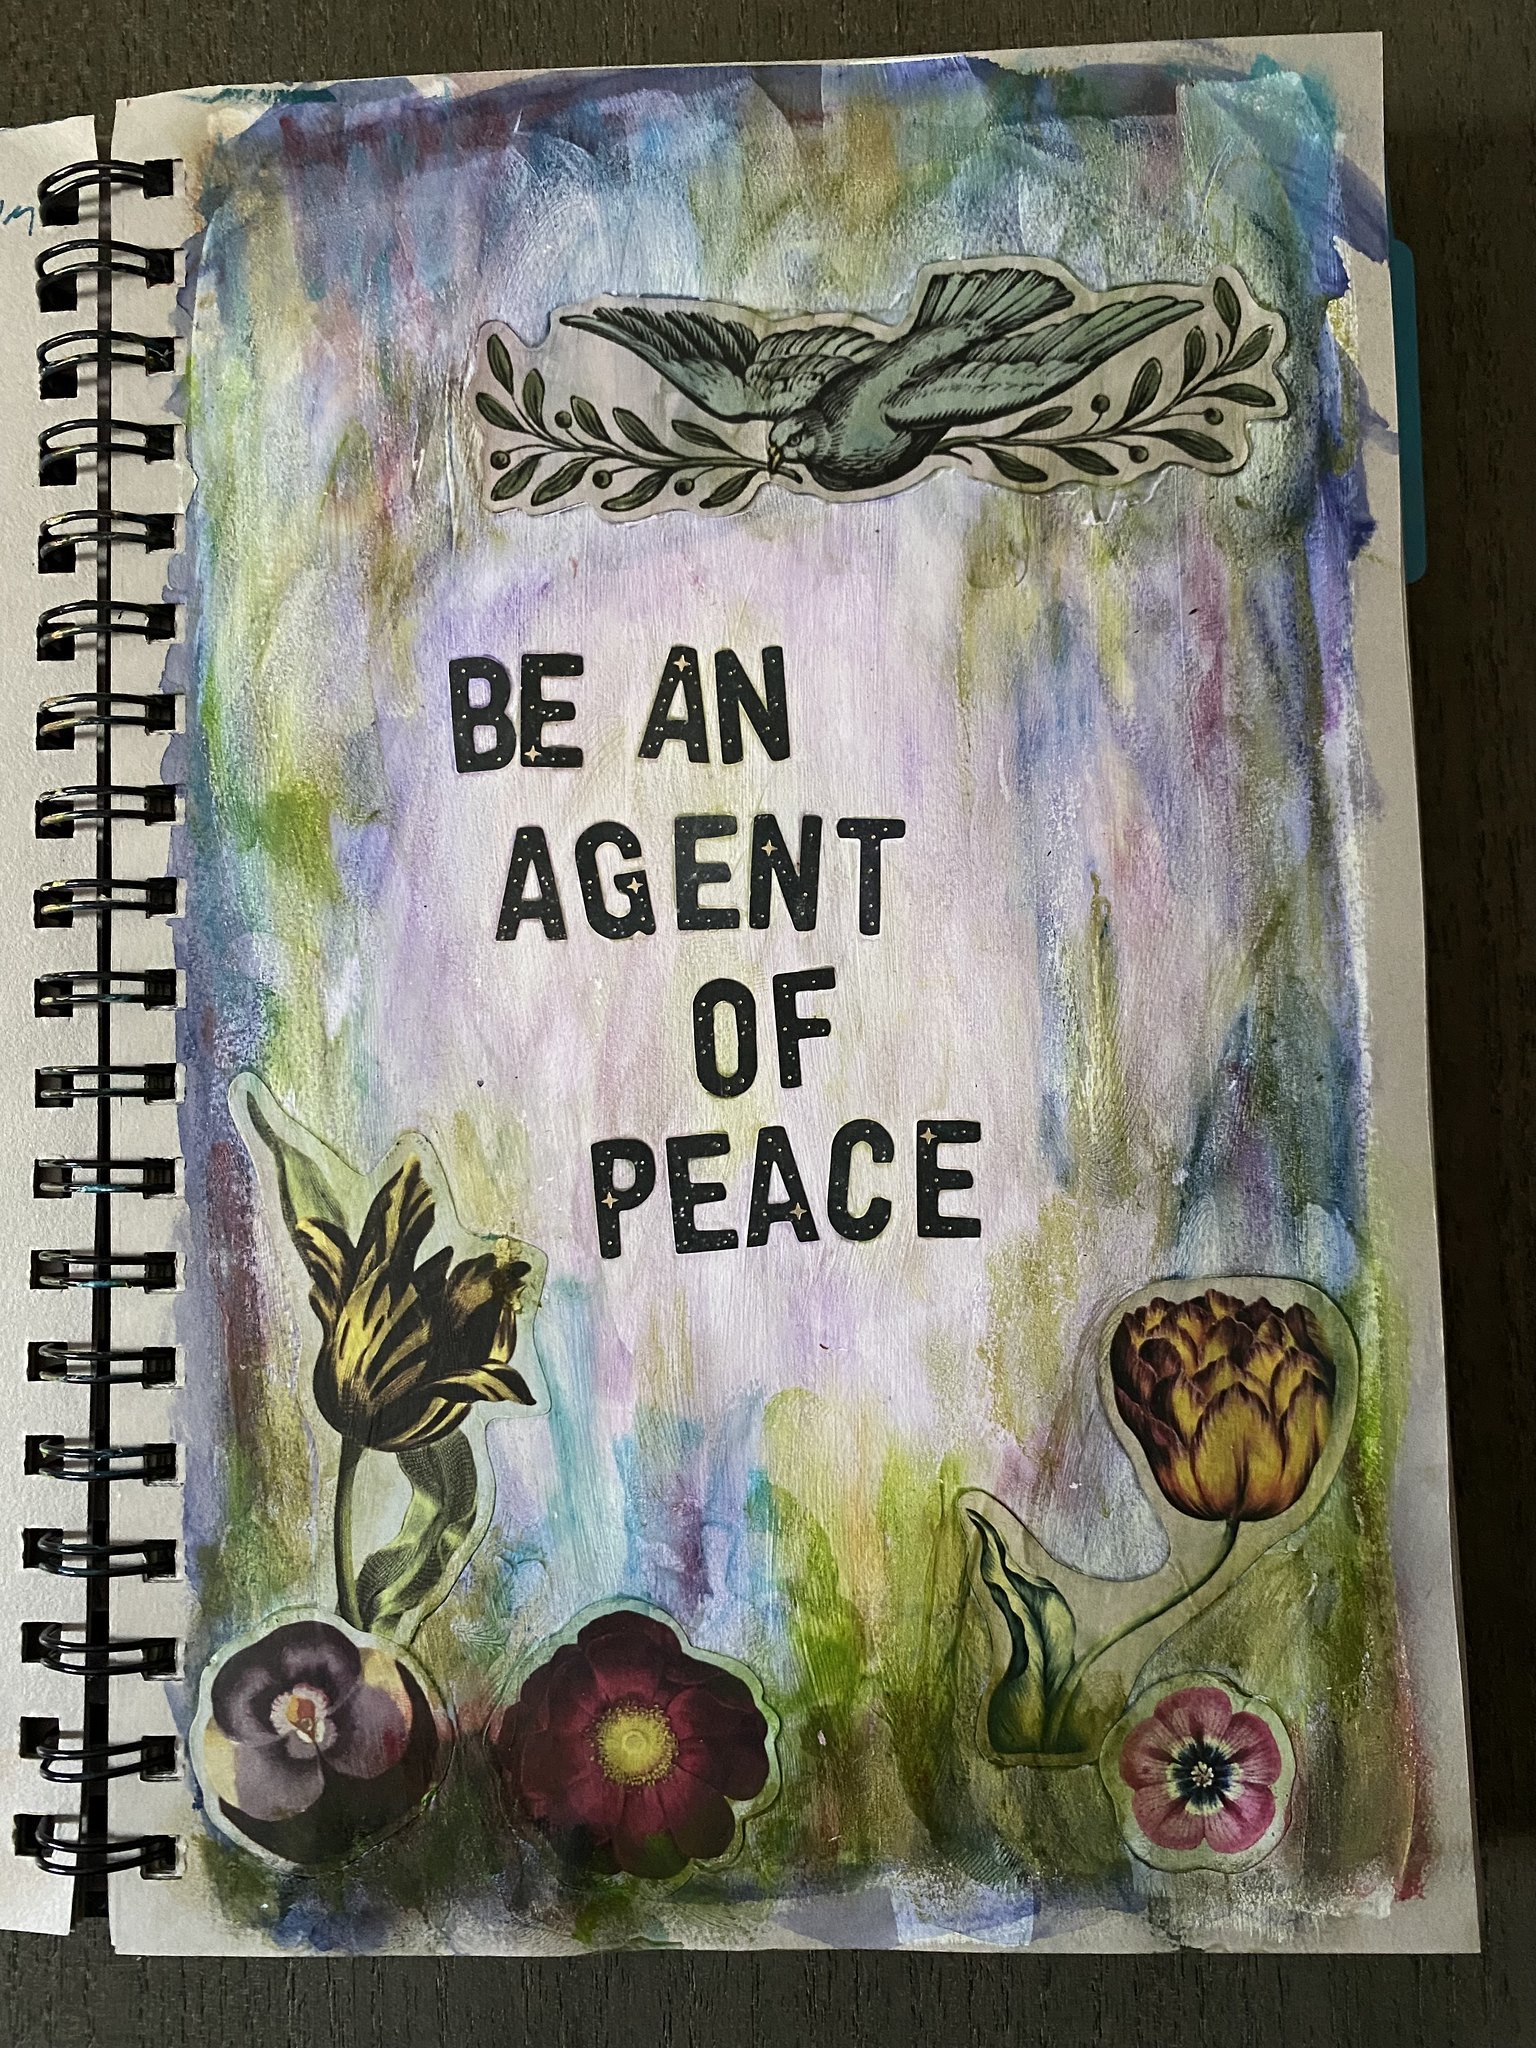 Be an agent of peace